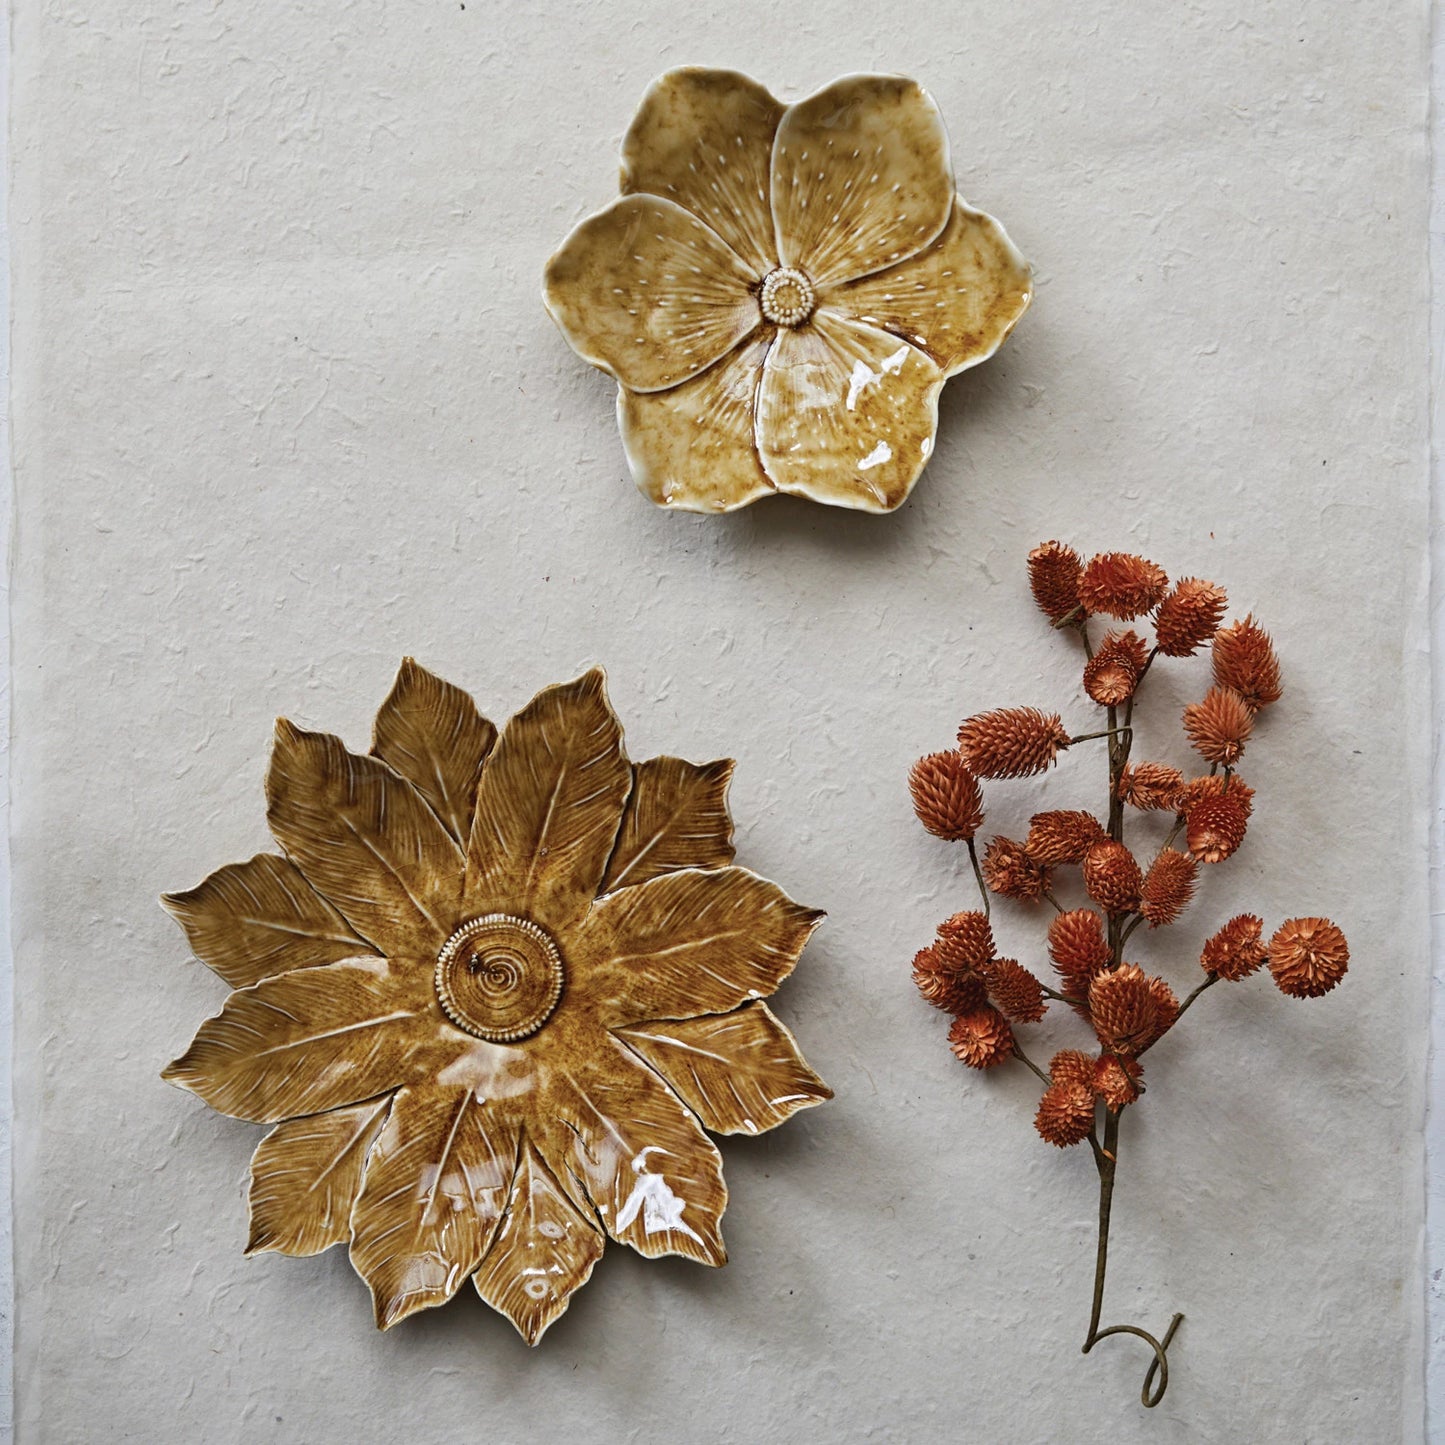 both sizes of stoneware flower plates displayed next to dried orange greenery on a textured light surface